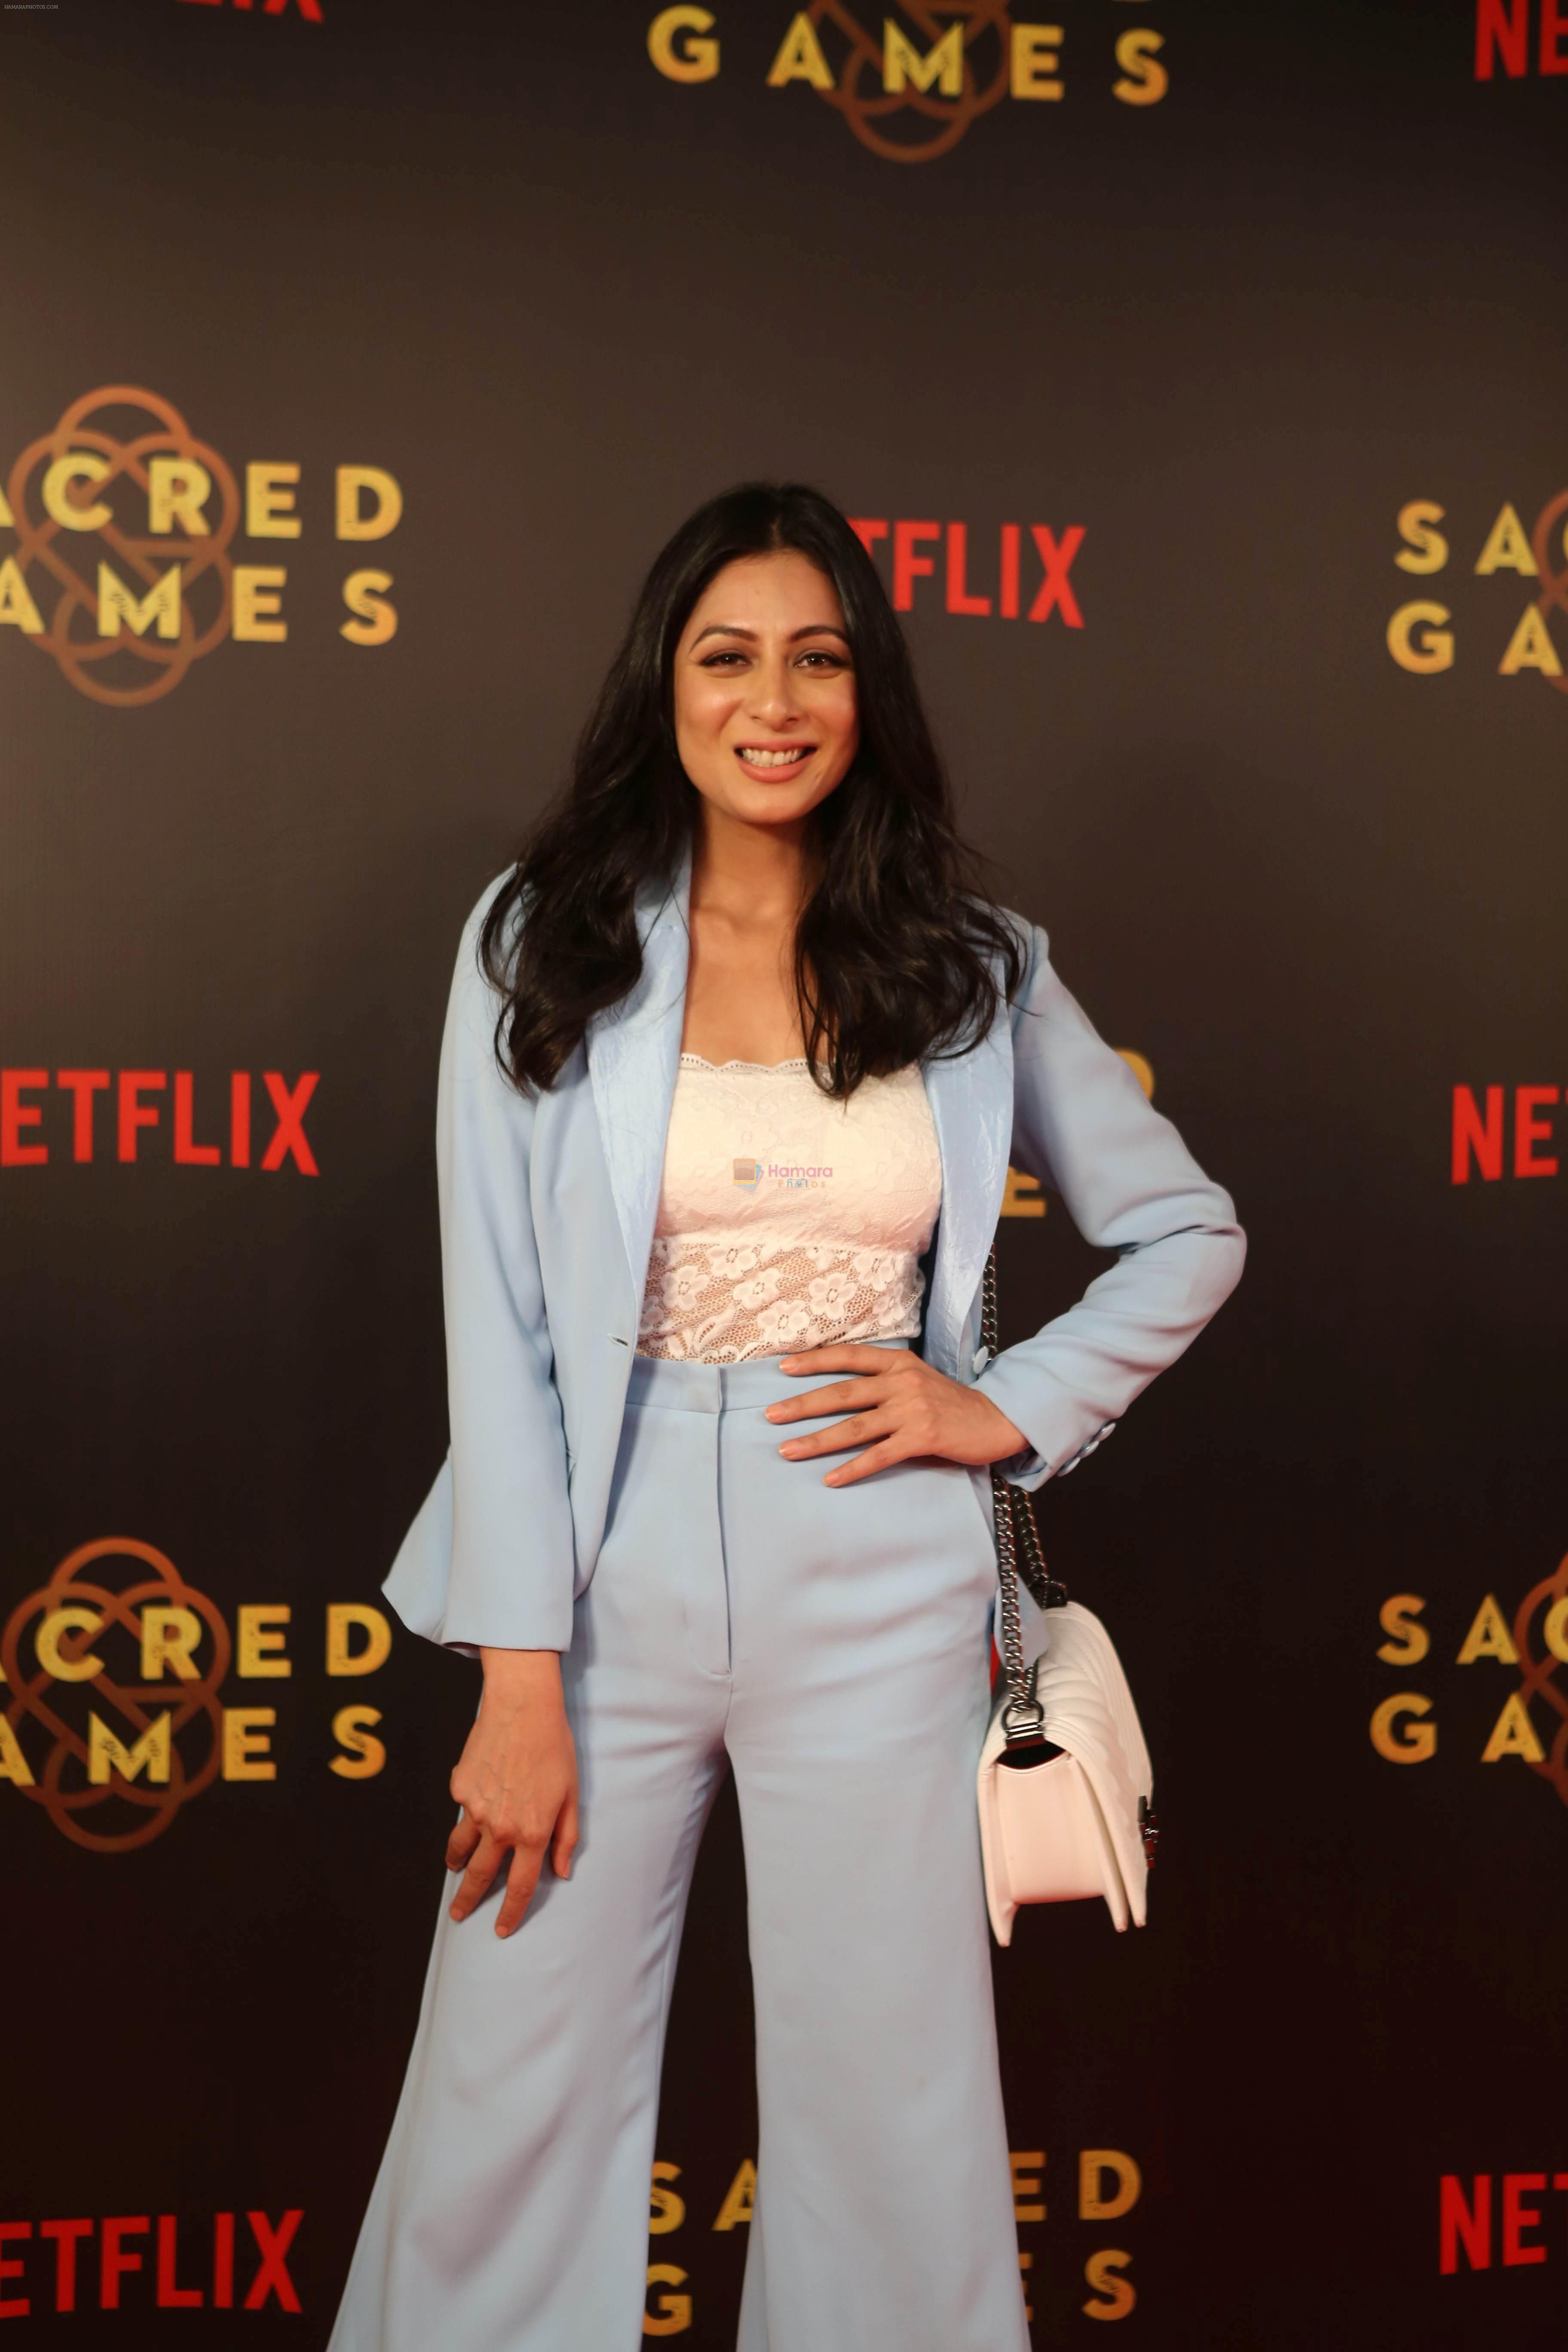 at the Screening of Netflix Sacred Games in pvr icon Andheri on 28th June 2018